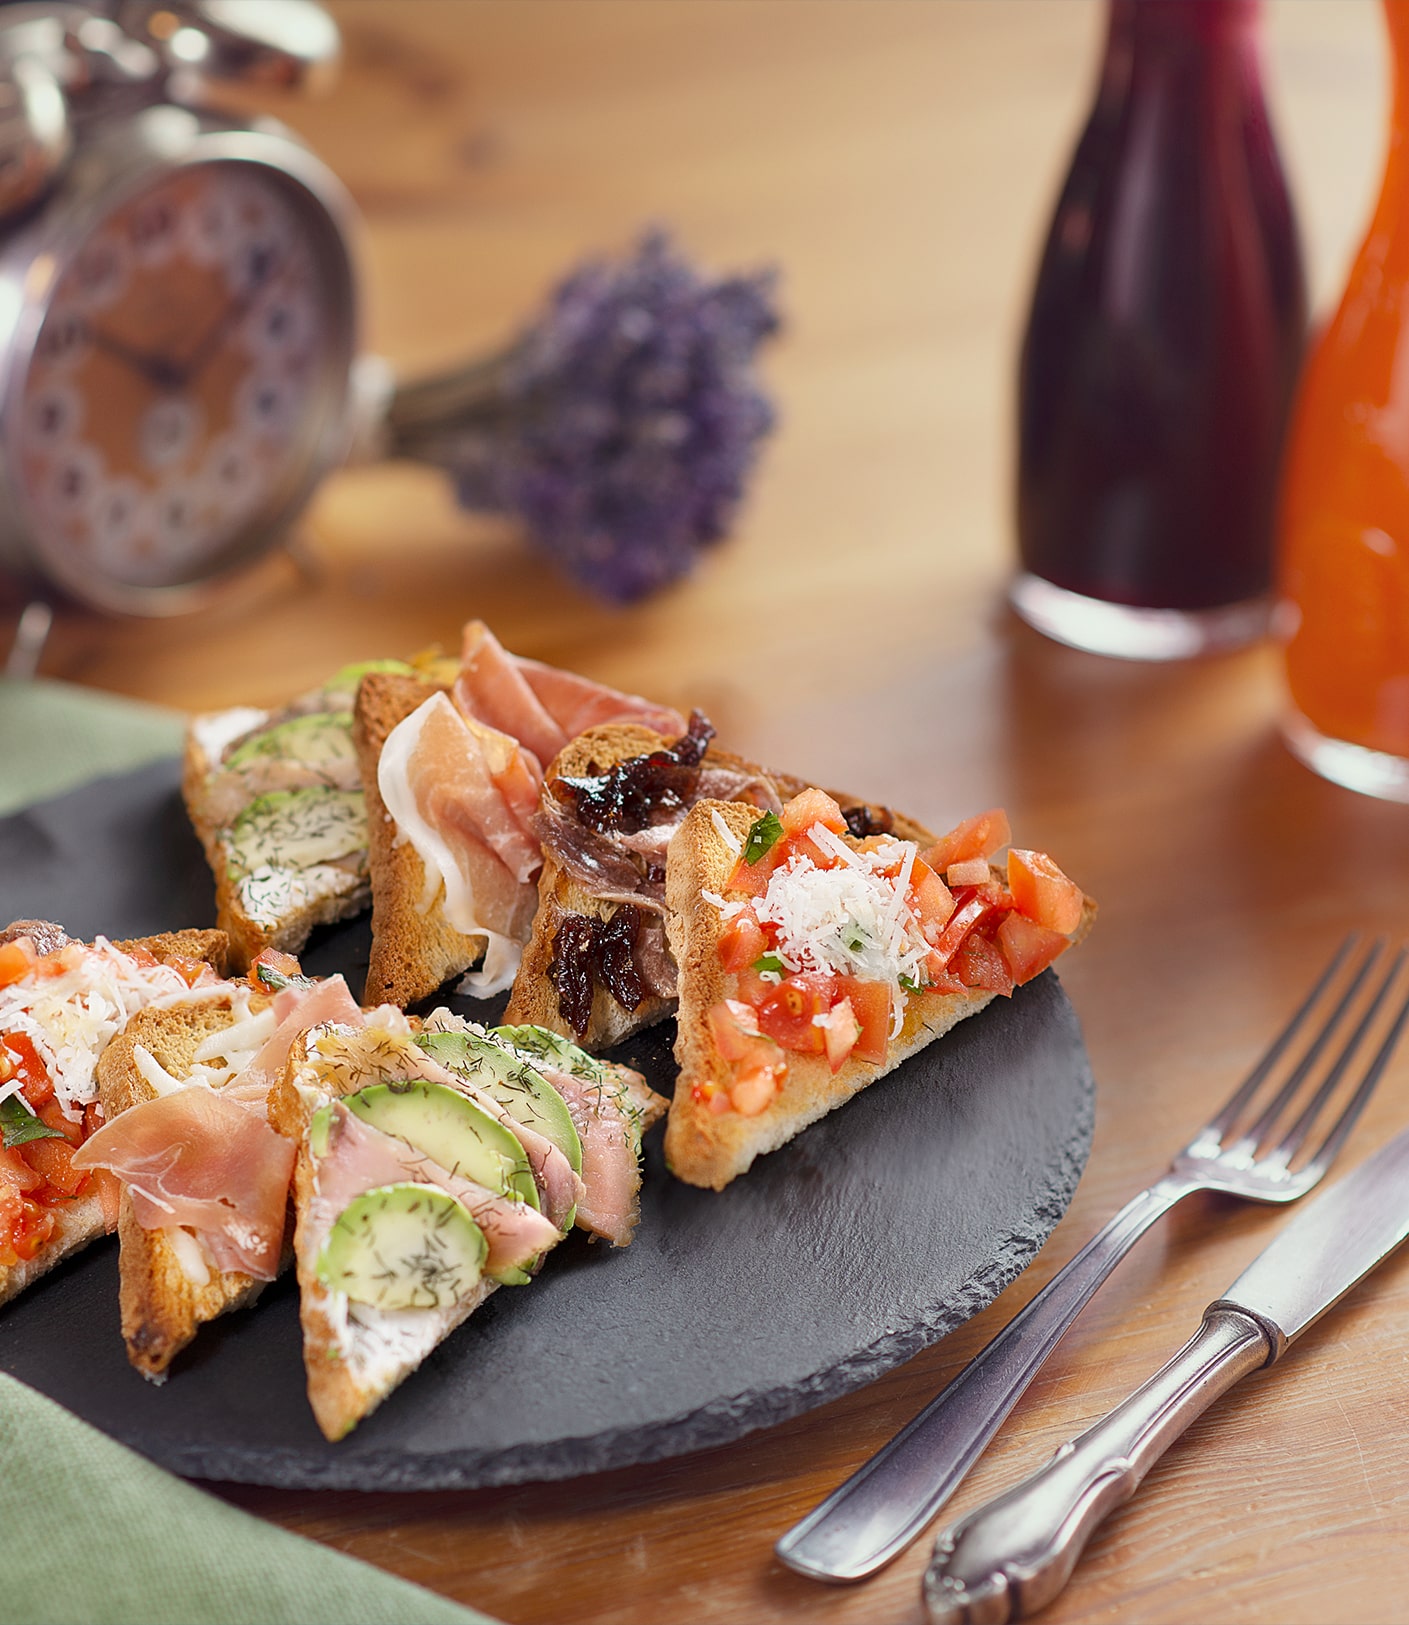 Mood photo of delicious slices of bread with avocado, salmon and tomatoes, with cozy wood background with a clock and a small lavender bouquet